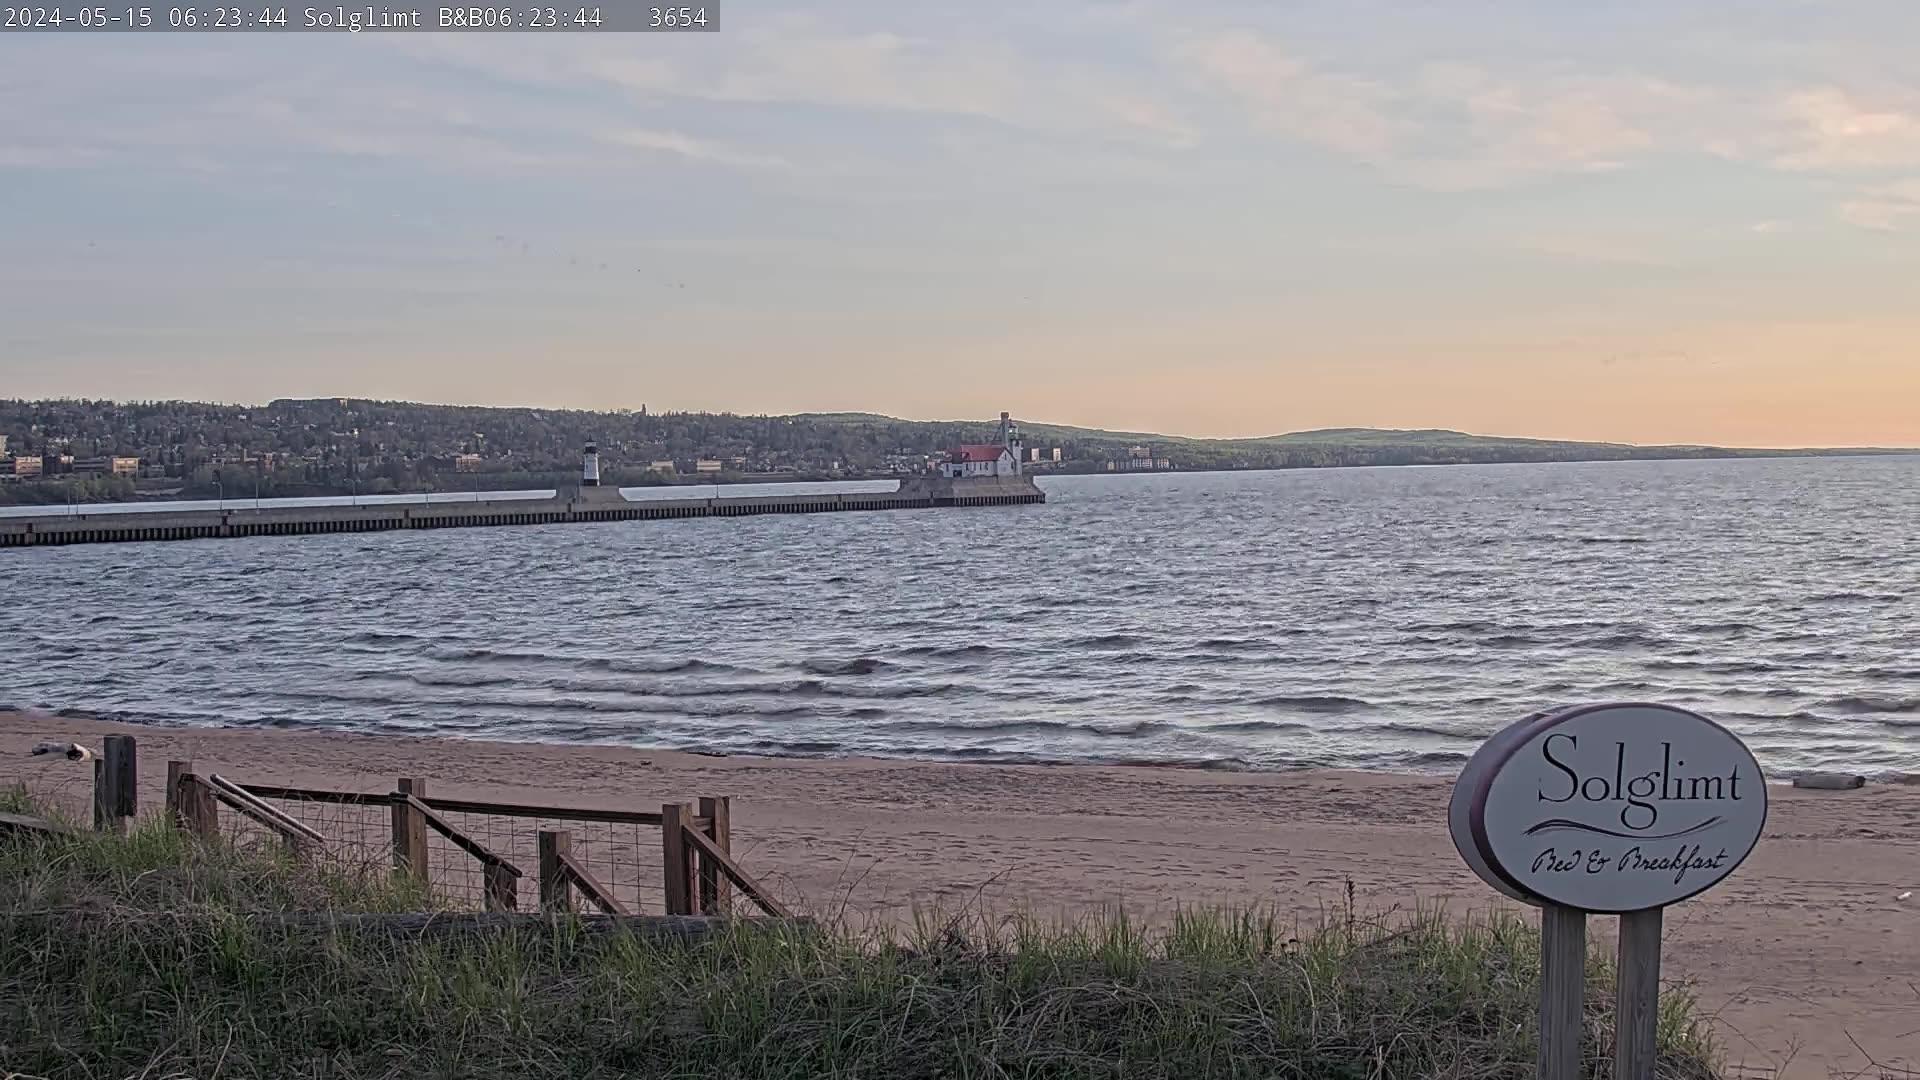 Traffic Cam Duluth: Lake Superior from Solglimt Player